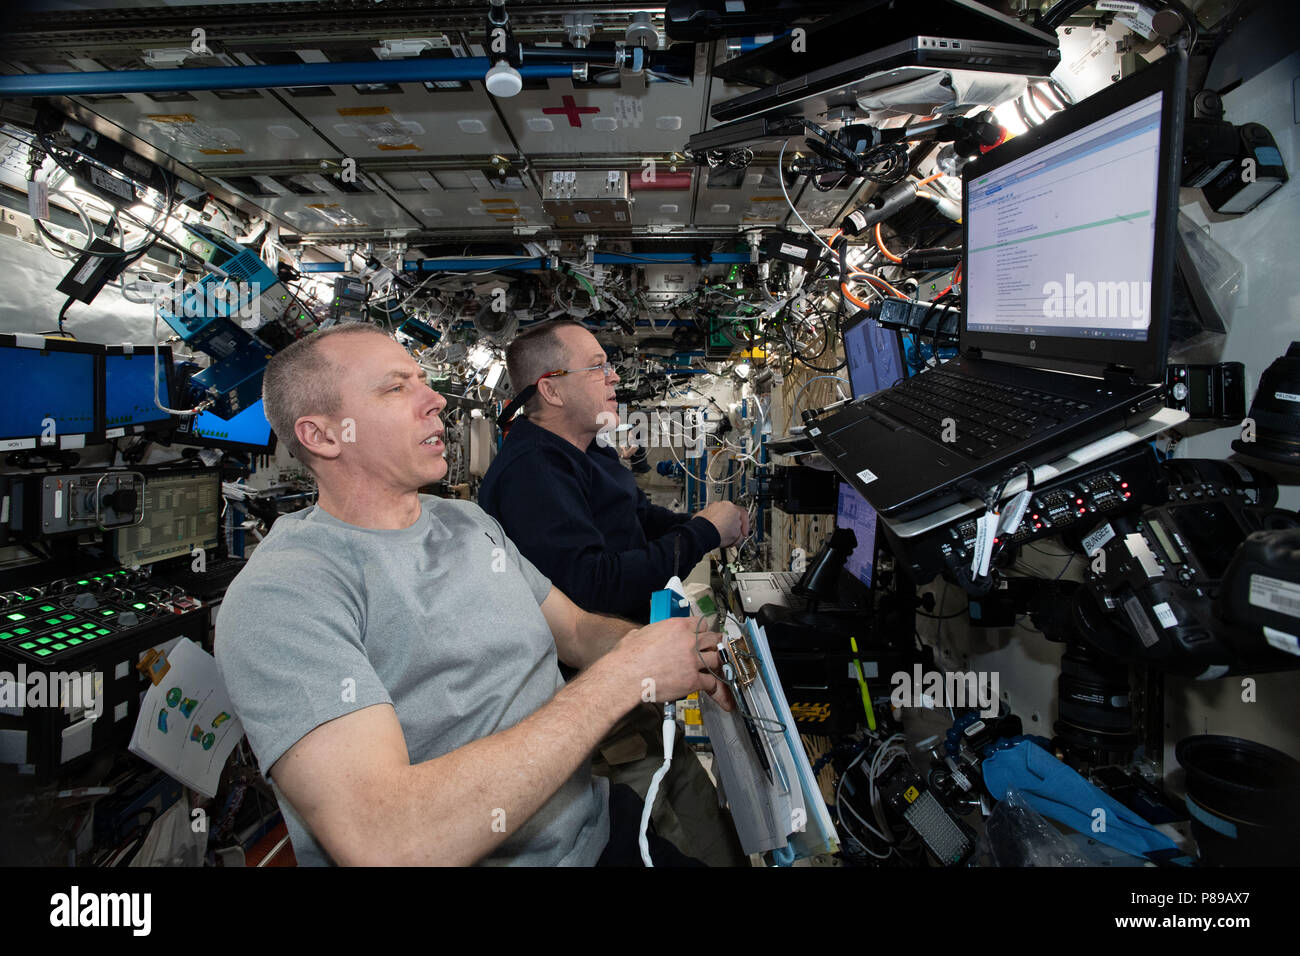 NASA astronauts Drew Feustel, foreground, and Ricky Arnold practice on a simulator before their upcoming robotic maneuvers to capture the SpaceX Dragon commercial cargo spaceship as it arrives at the International Space Station June 26, 2018 in Earth Orbit. Stock Photo